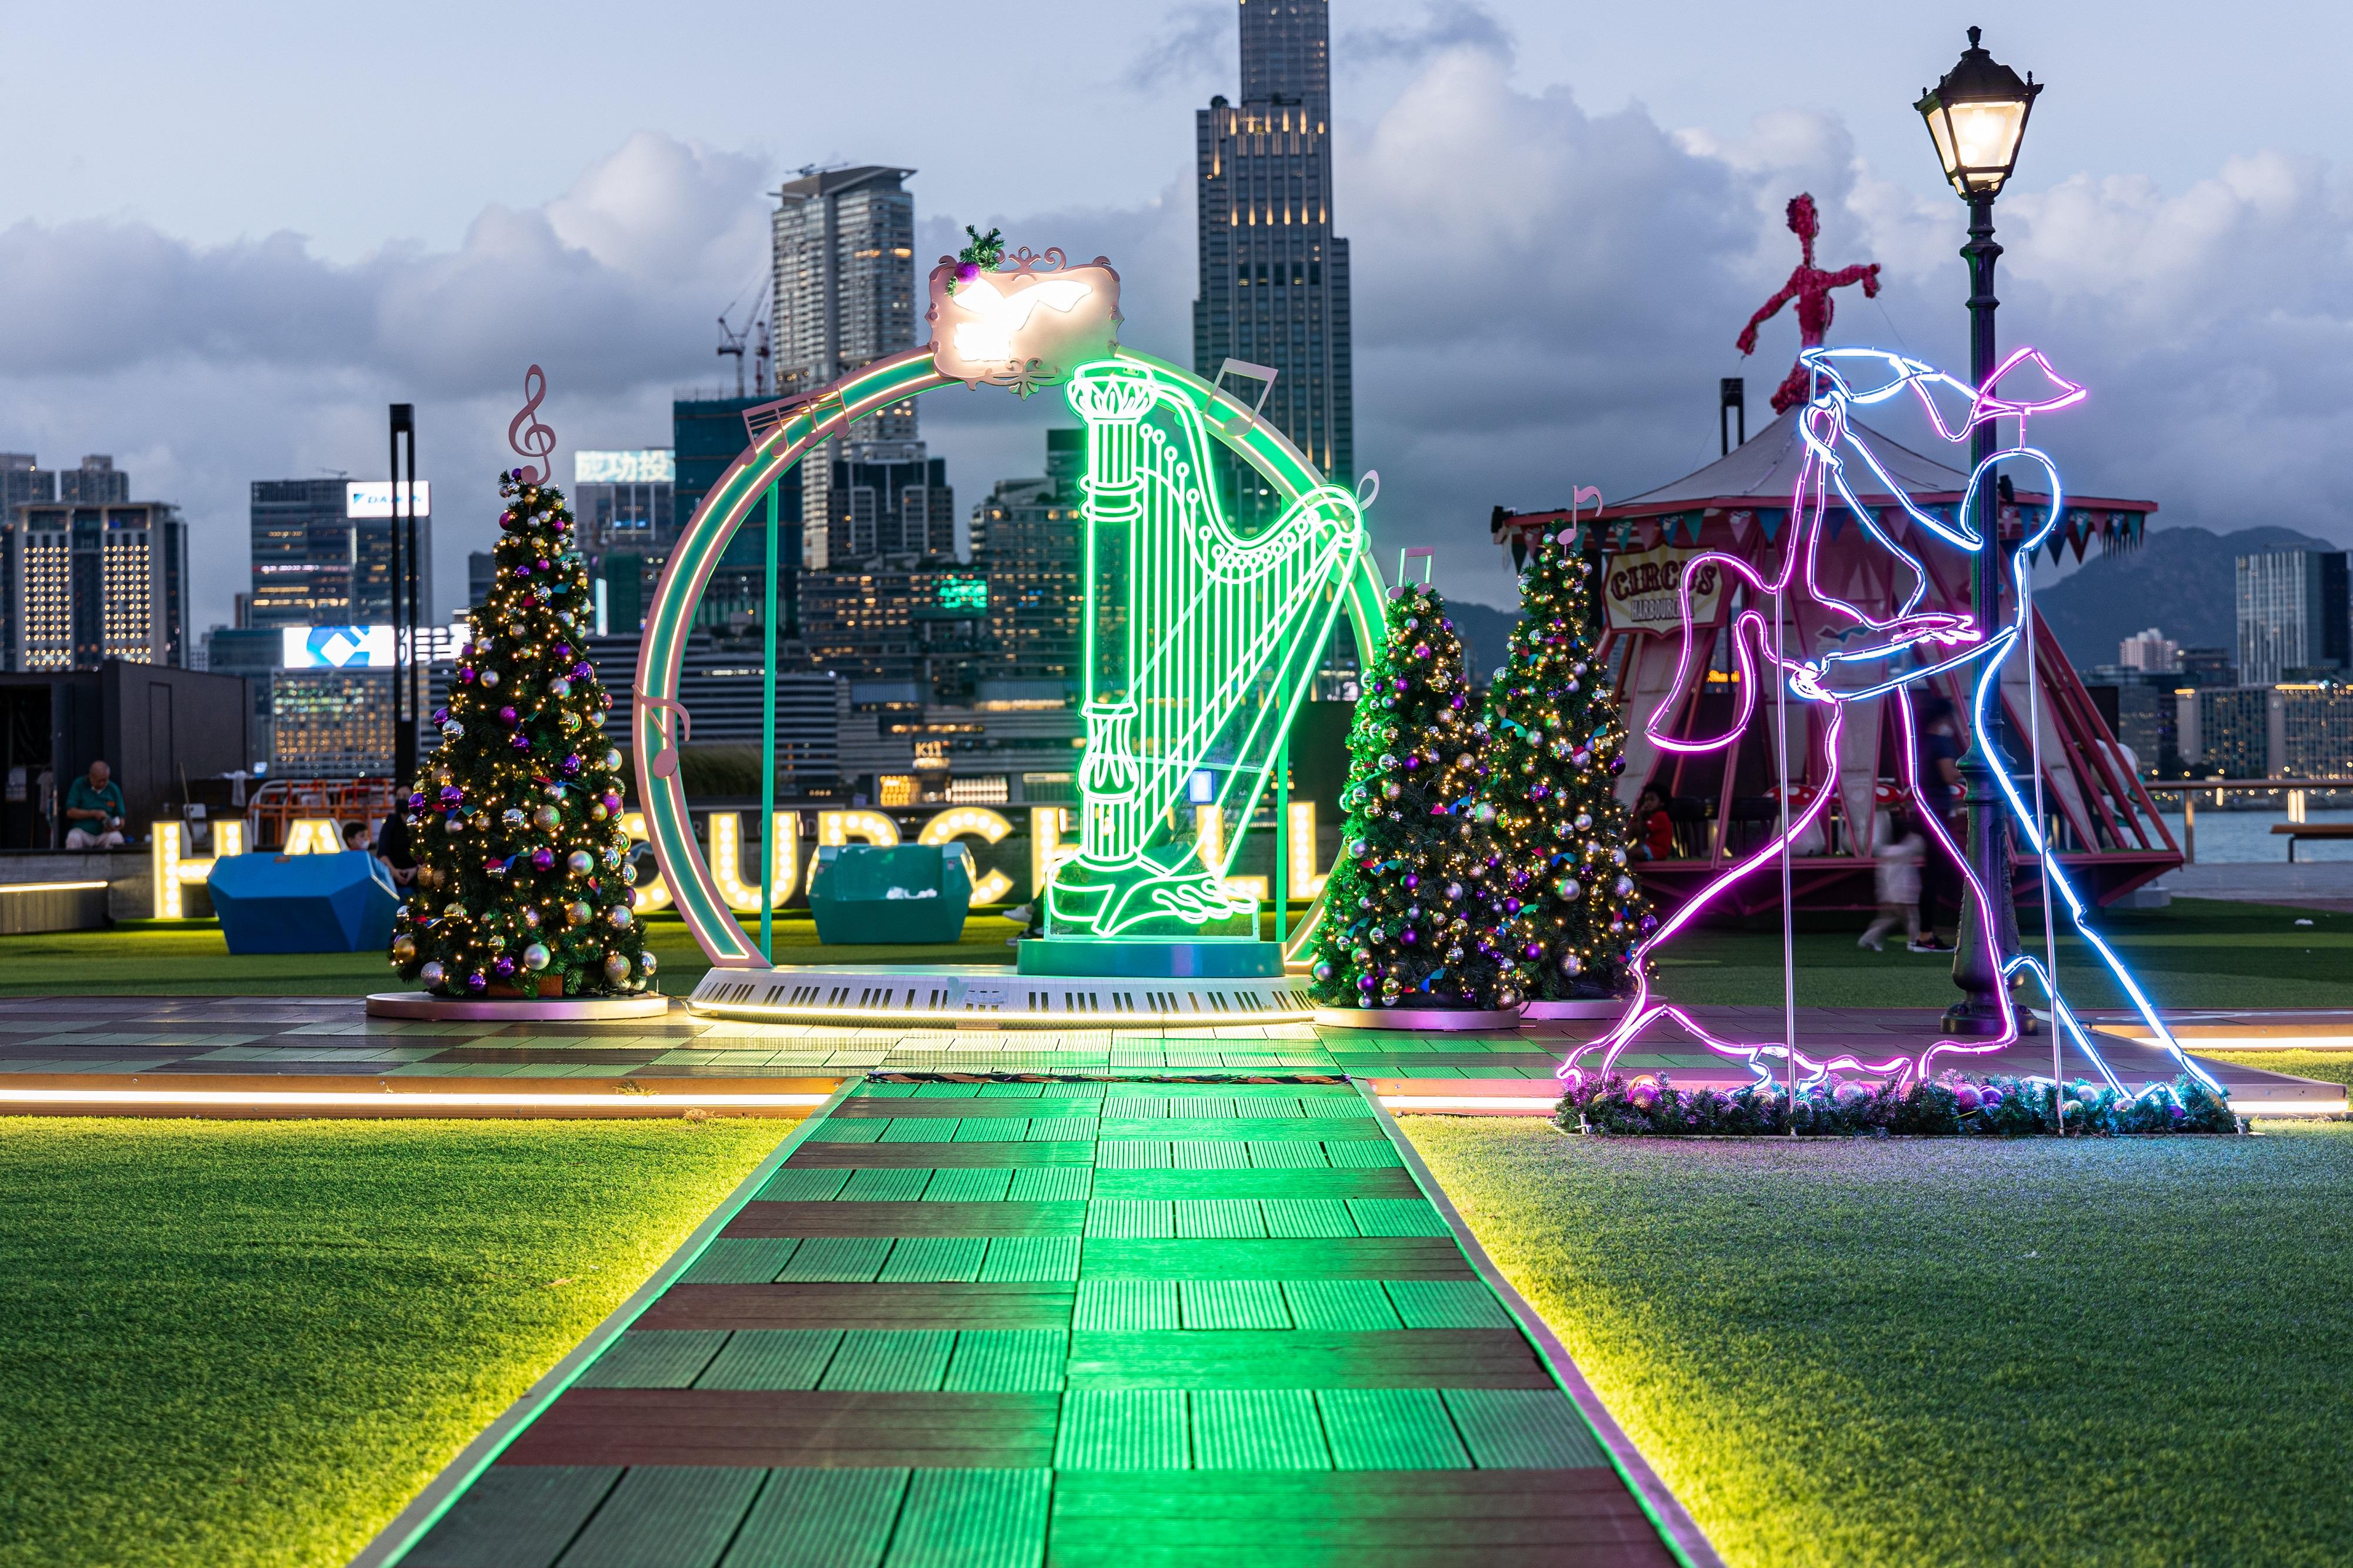 Inheriting the concept of Harbourfront is One and All, Christmas activities this year are held under the theme "Your Show Time" at seven harbourfront sites. Photo shows Christmas decorations at the HarbourChill in Wan Chai under the theme of waltz dancing and orchestral music.